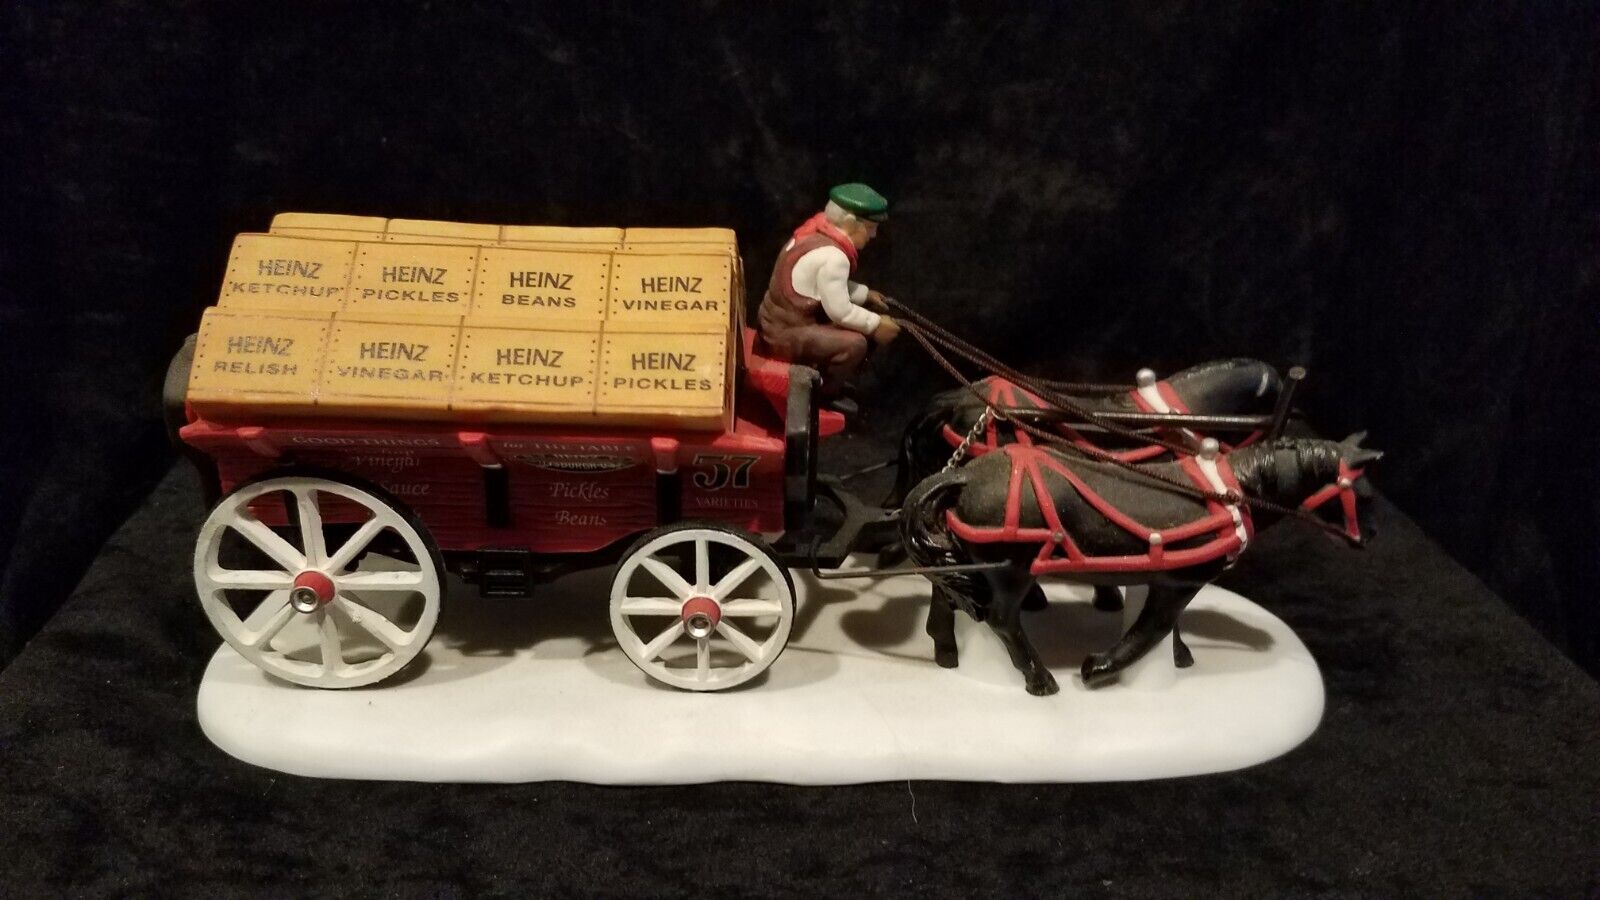 DEPT 56 HEINZ HITCH DELIVERY HORSE WAGON 1999 LIMITED EDITION with Box